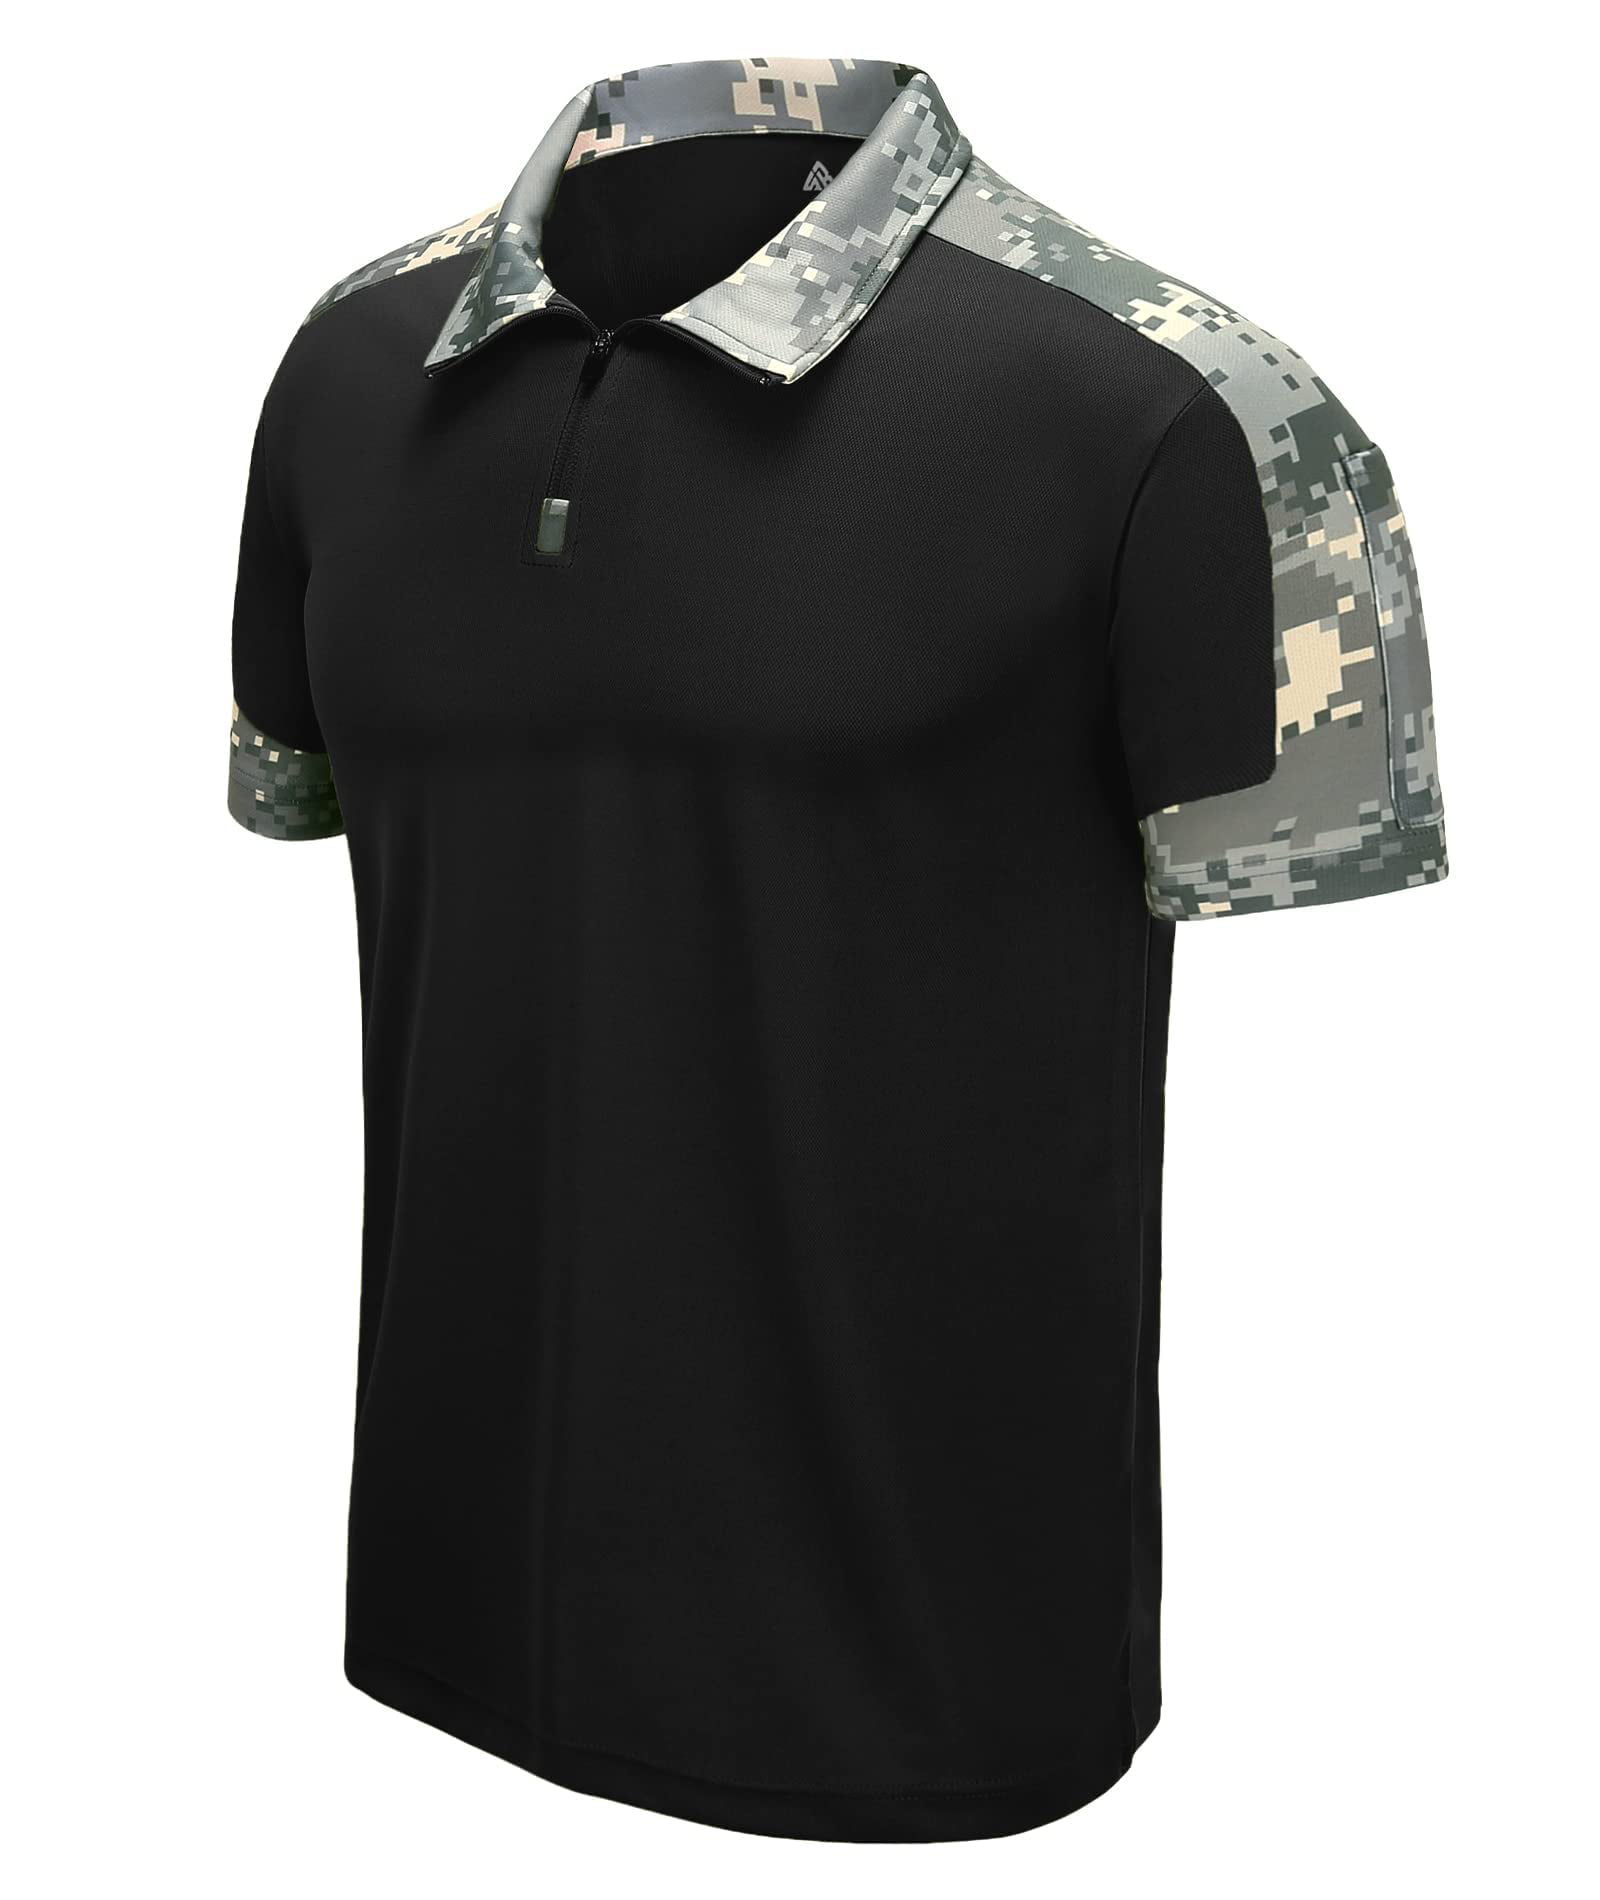 ZITY Tactical Shirts for Men Military Golf Shirts Short Sleeve with ...